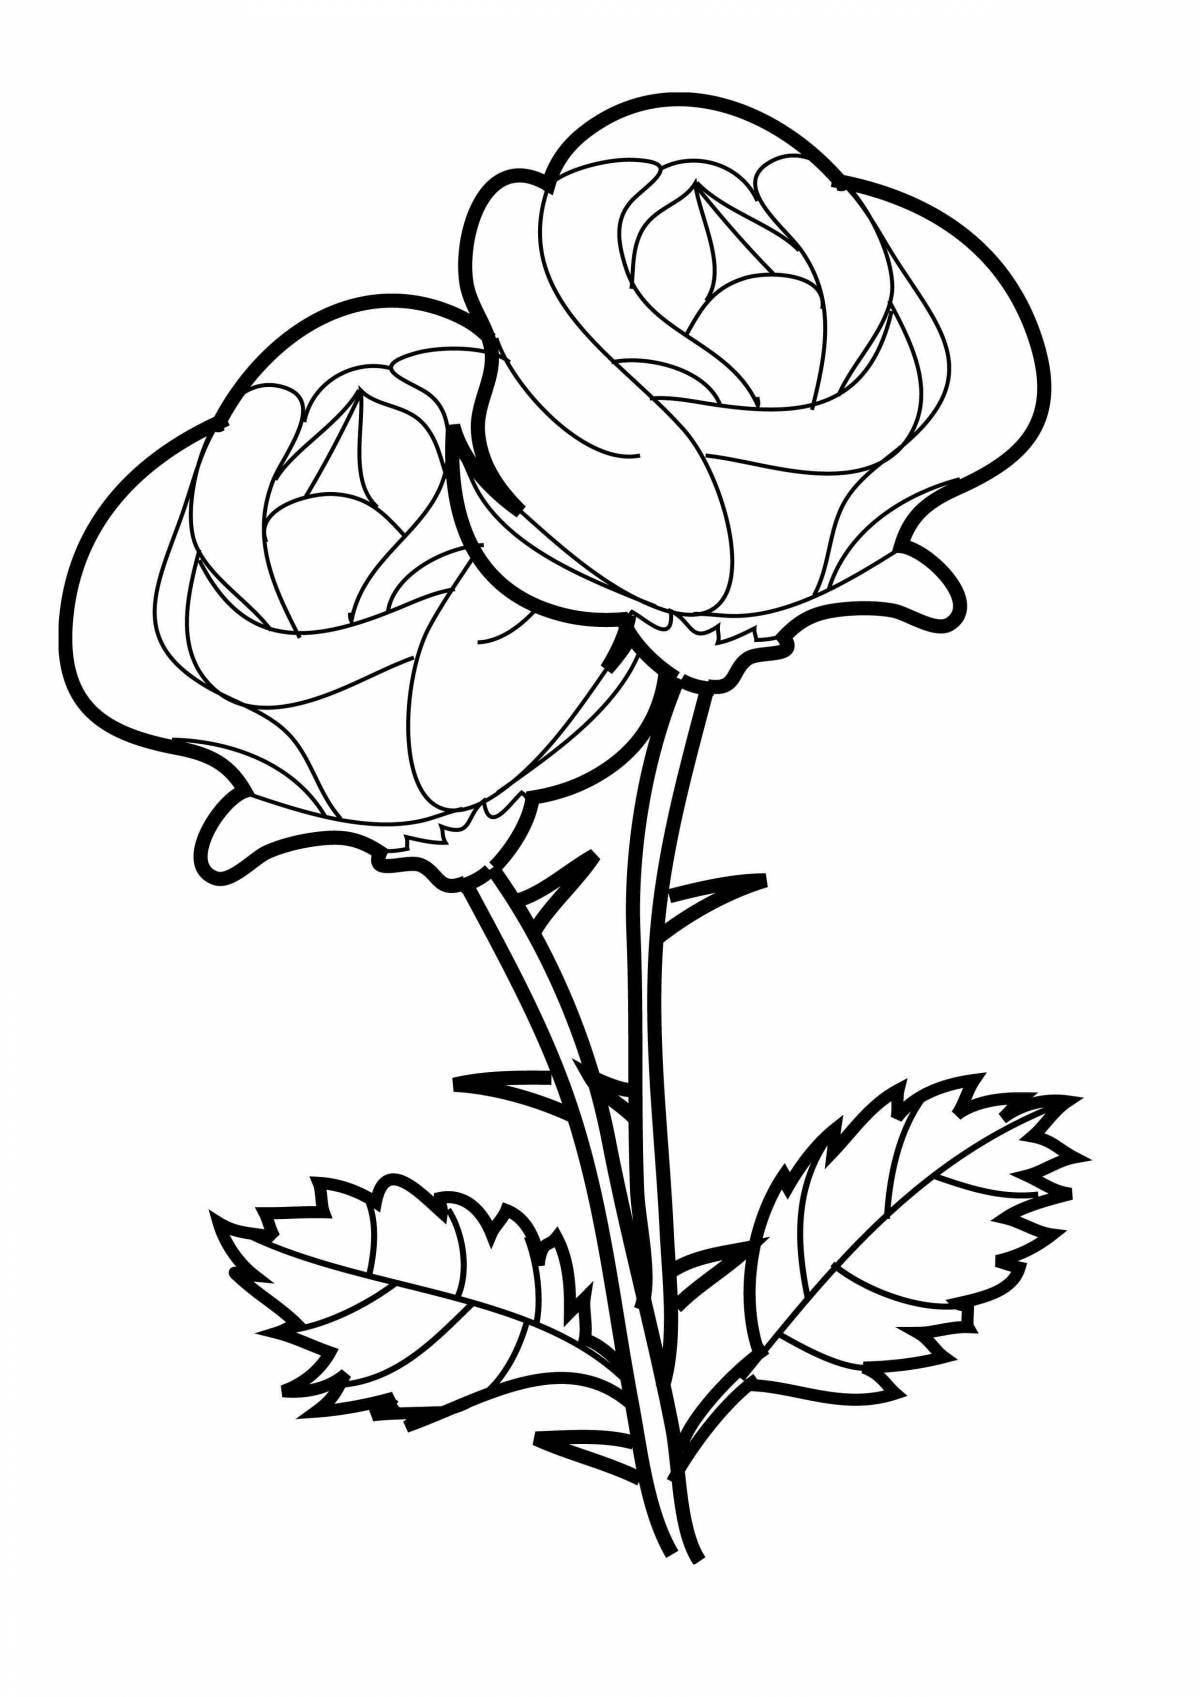 Sweet rose bouquet coloring page